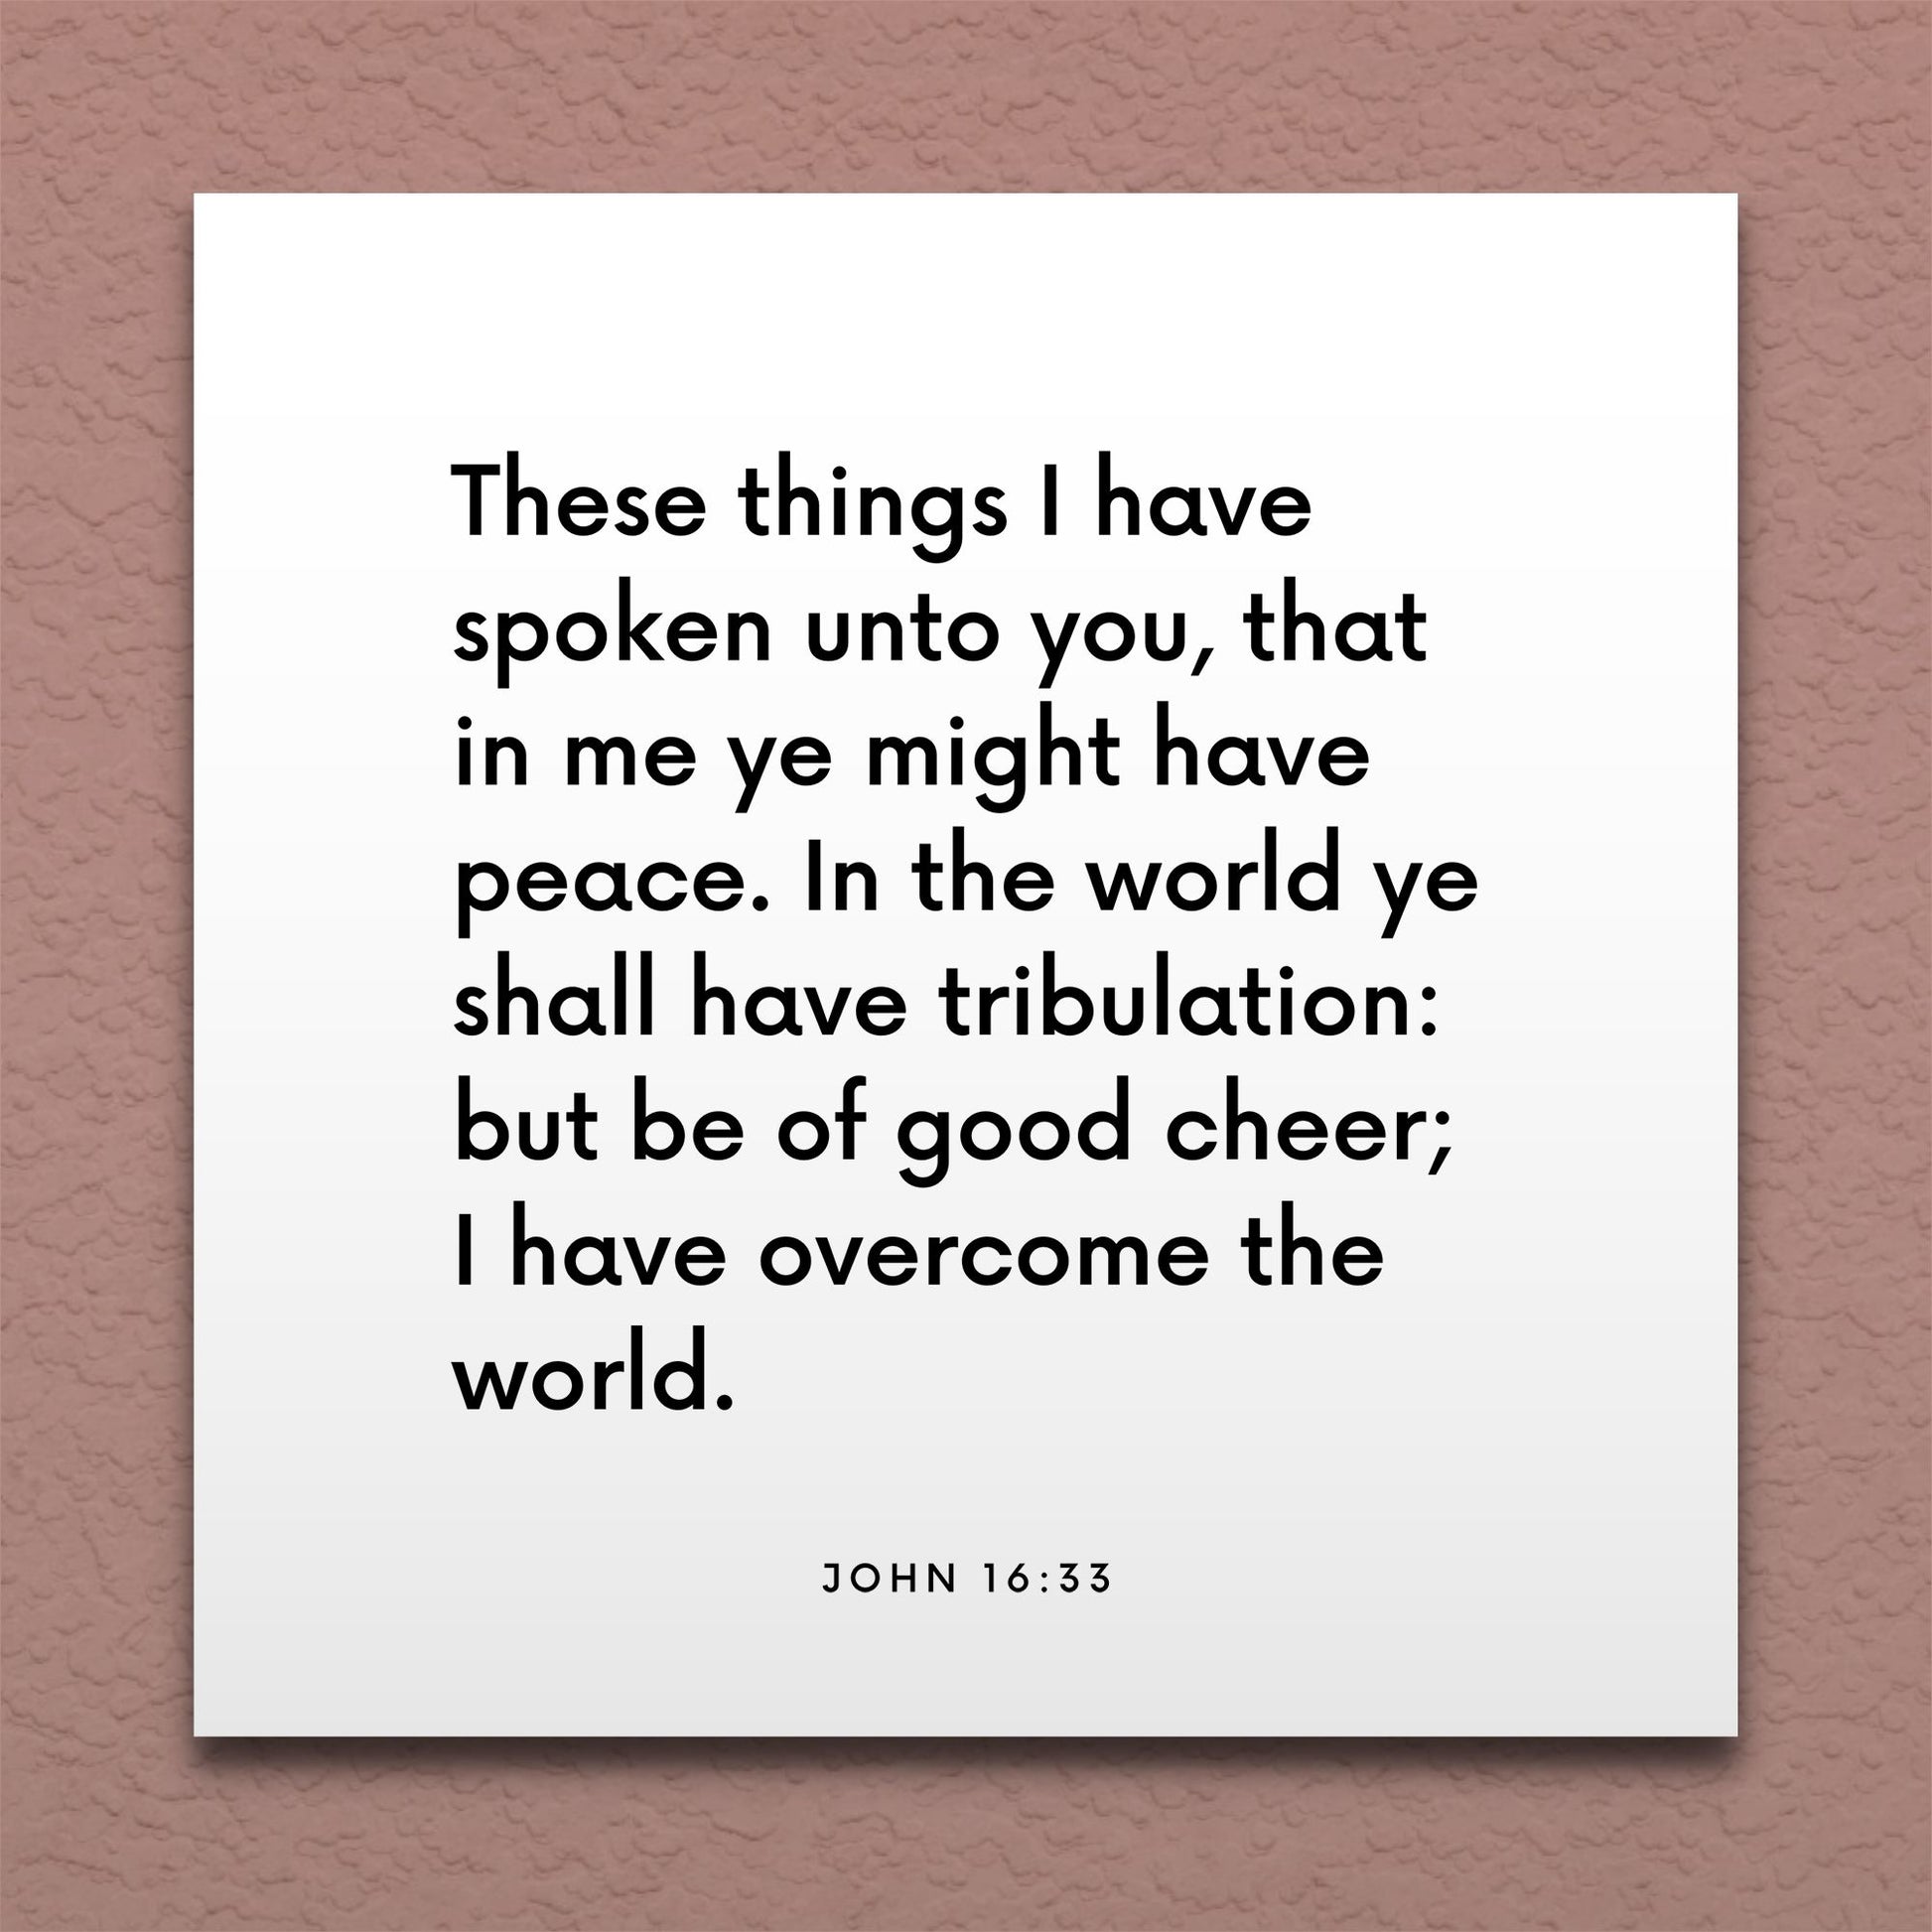 Wall-mounted scripture tile for John 16:33 - "Be of good cheer; I have overcome the world"